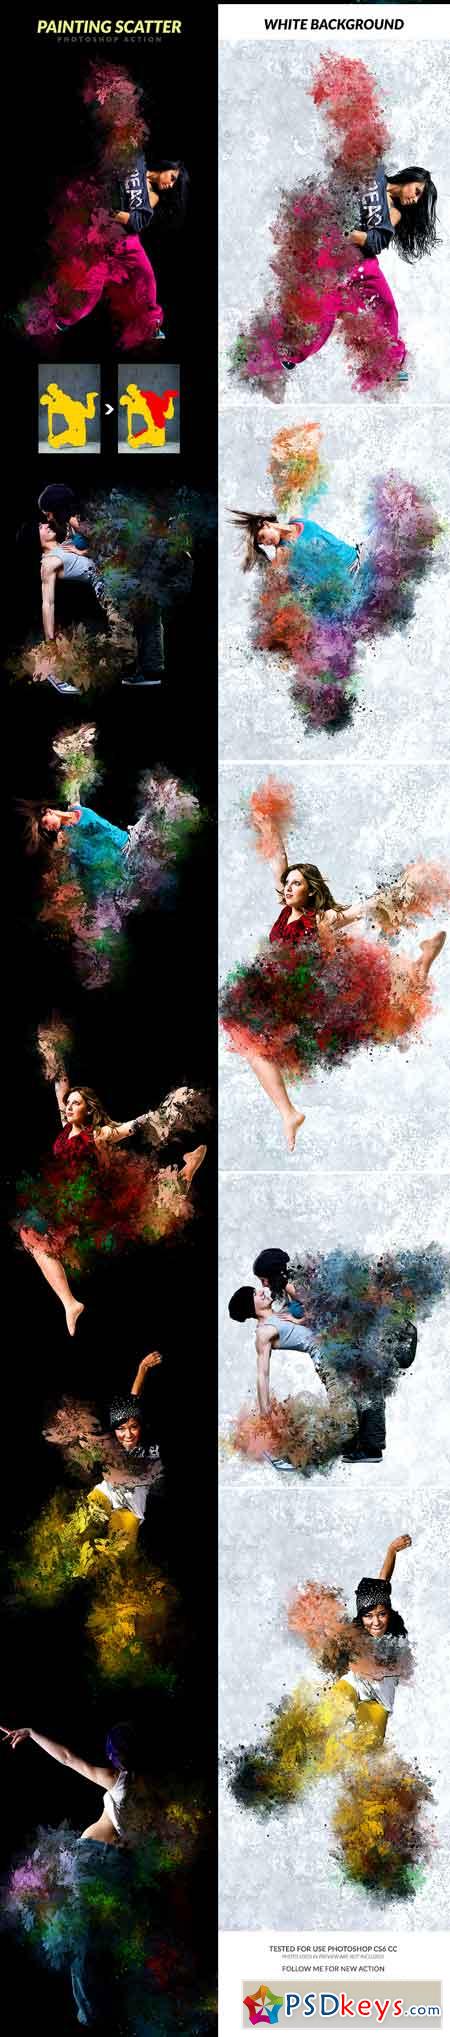 Painting Scatter Photoshop Action 16828368